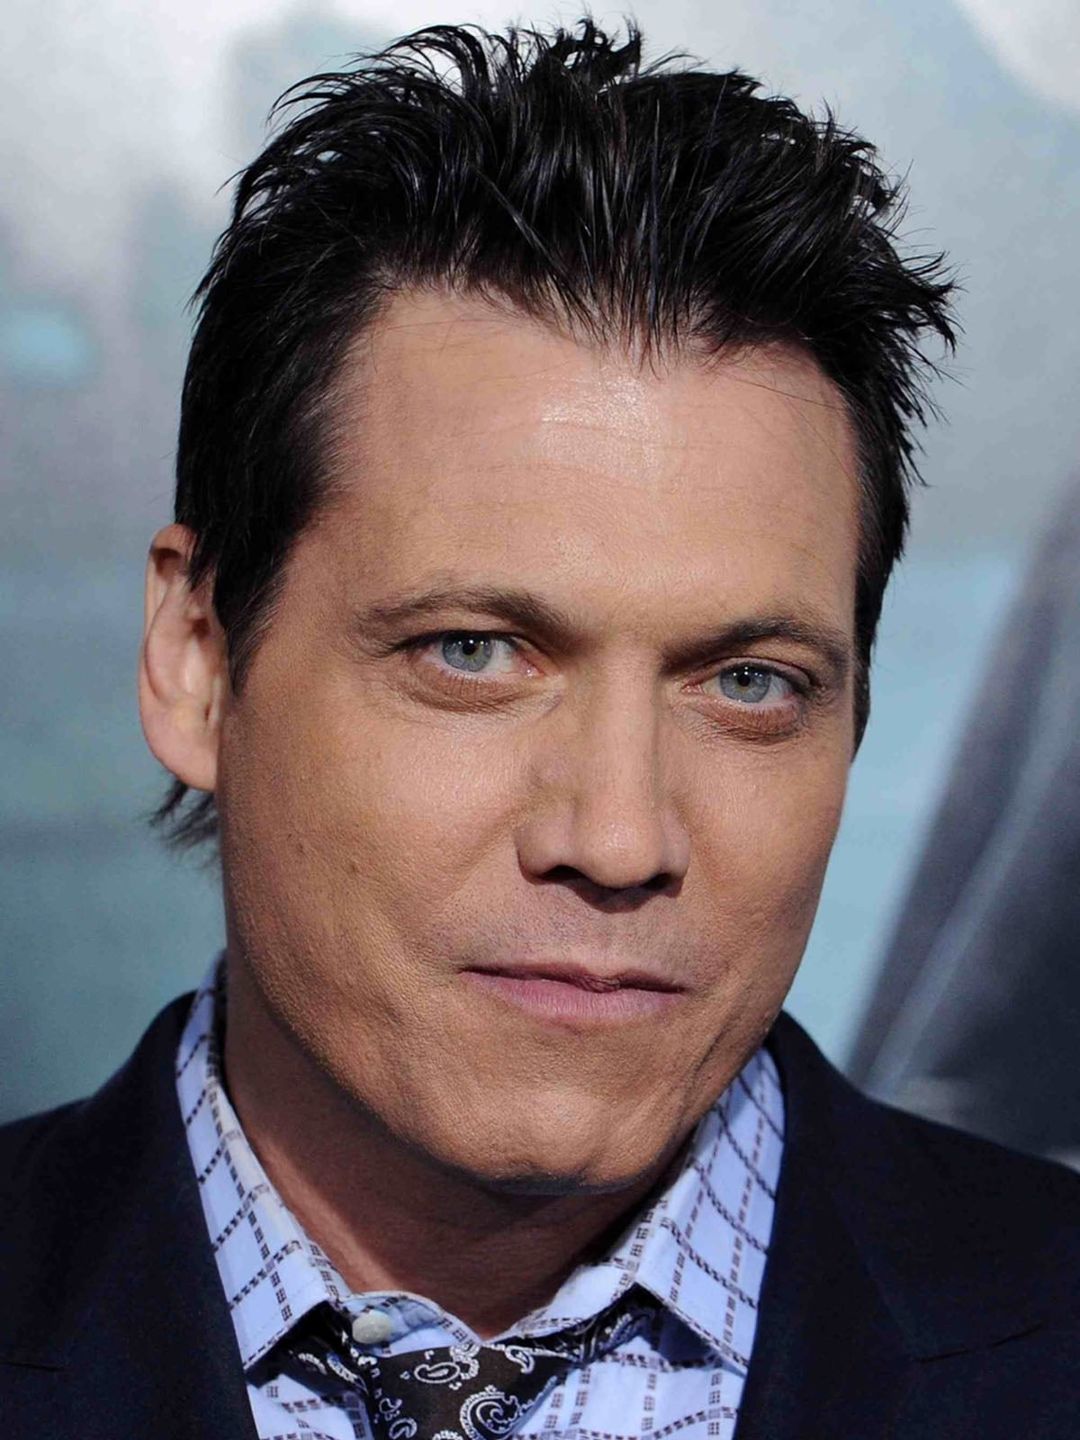 Holt McCallany early life